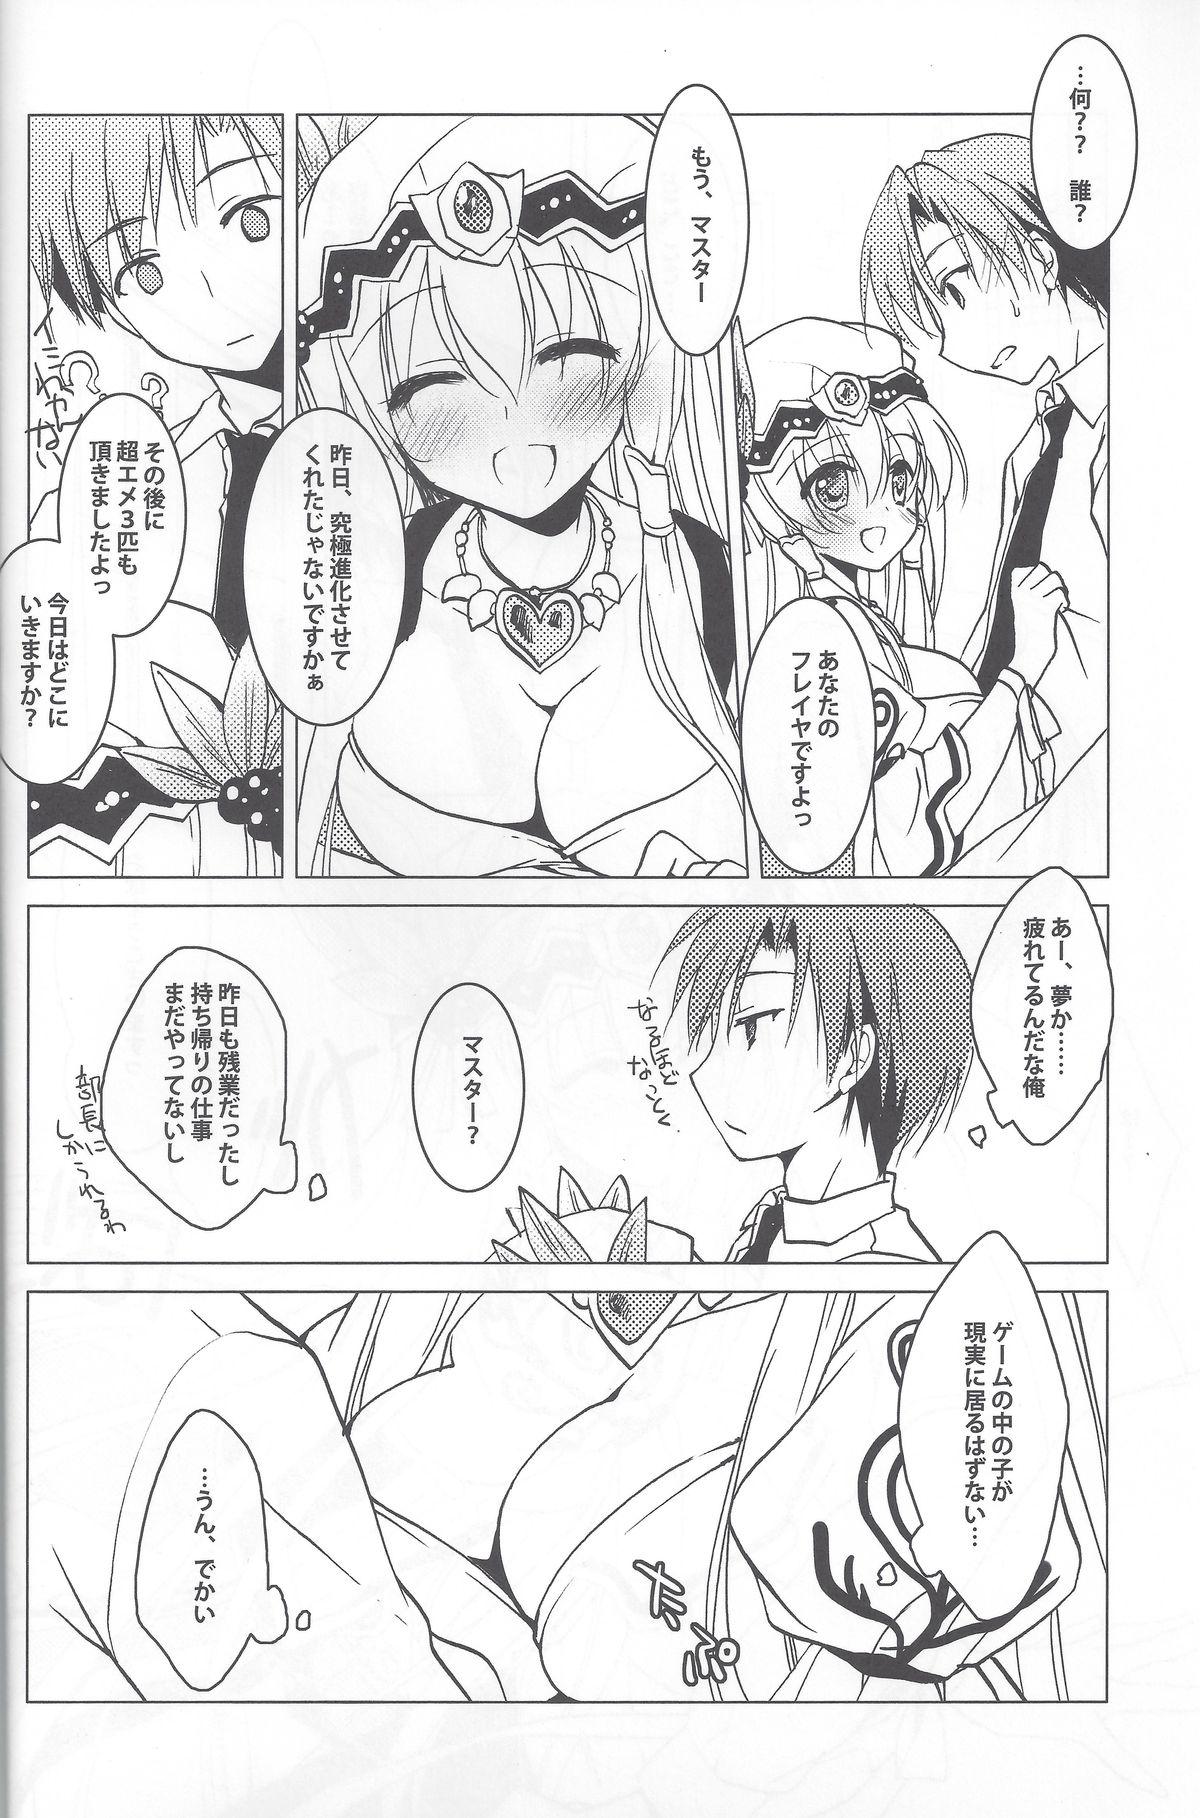 Office Sex Puz-Dorastic - Puzzle and dragons Pain - Page 3